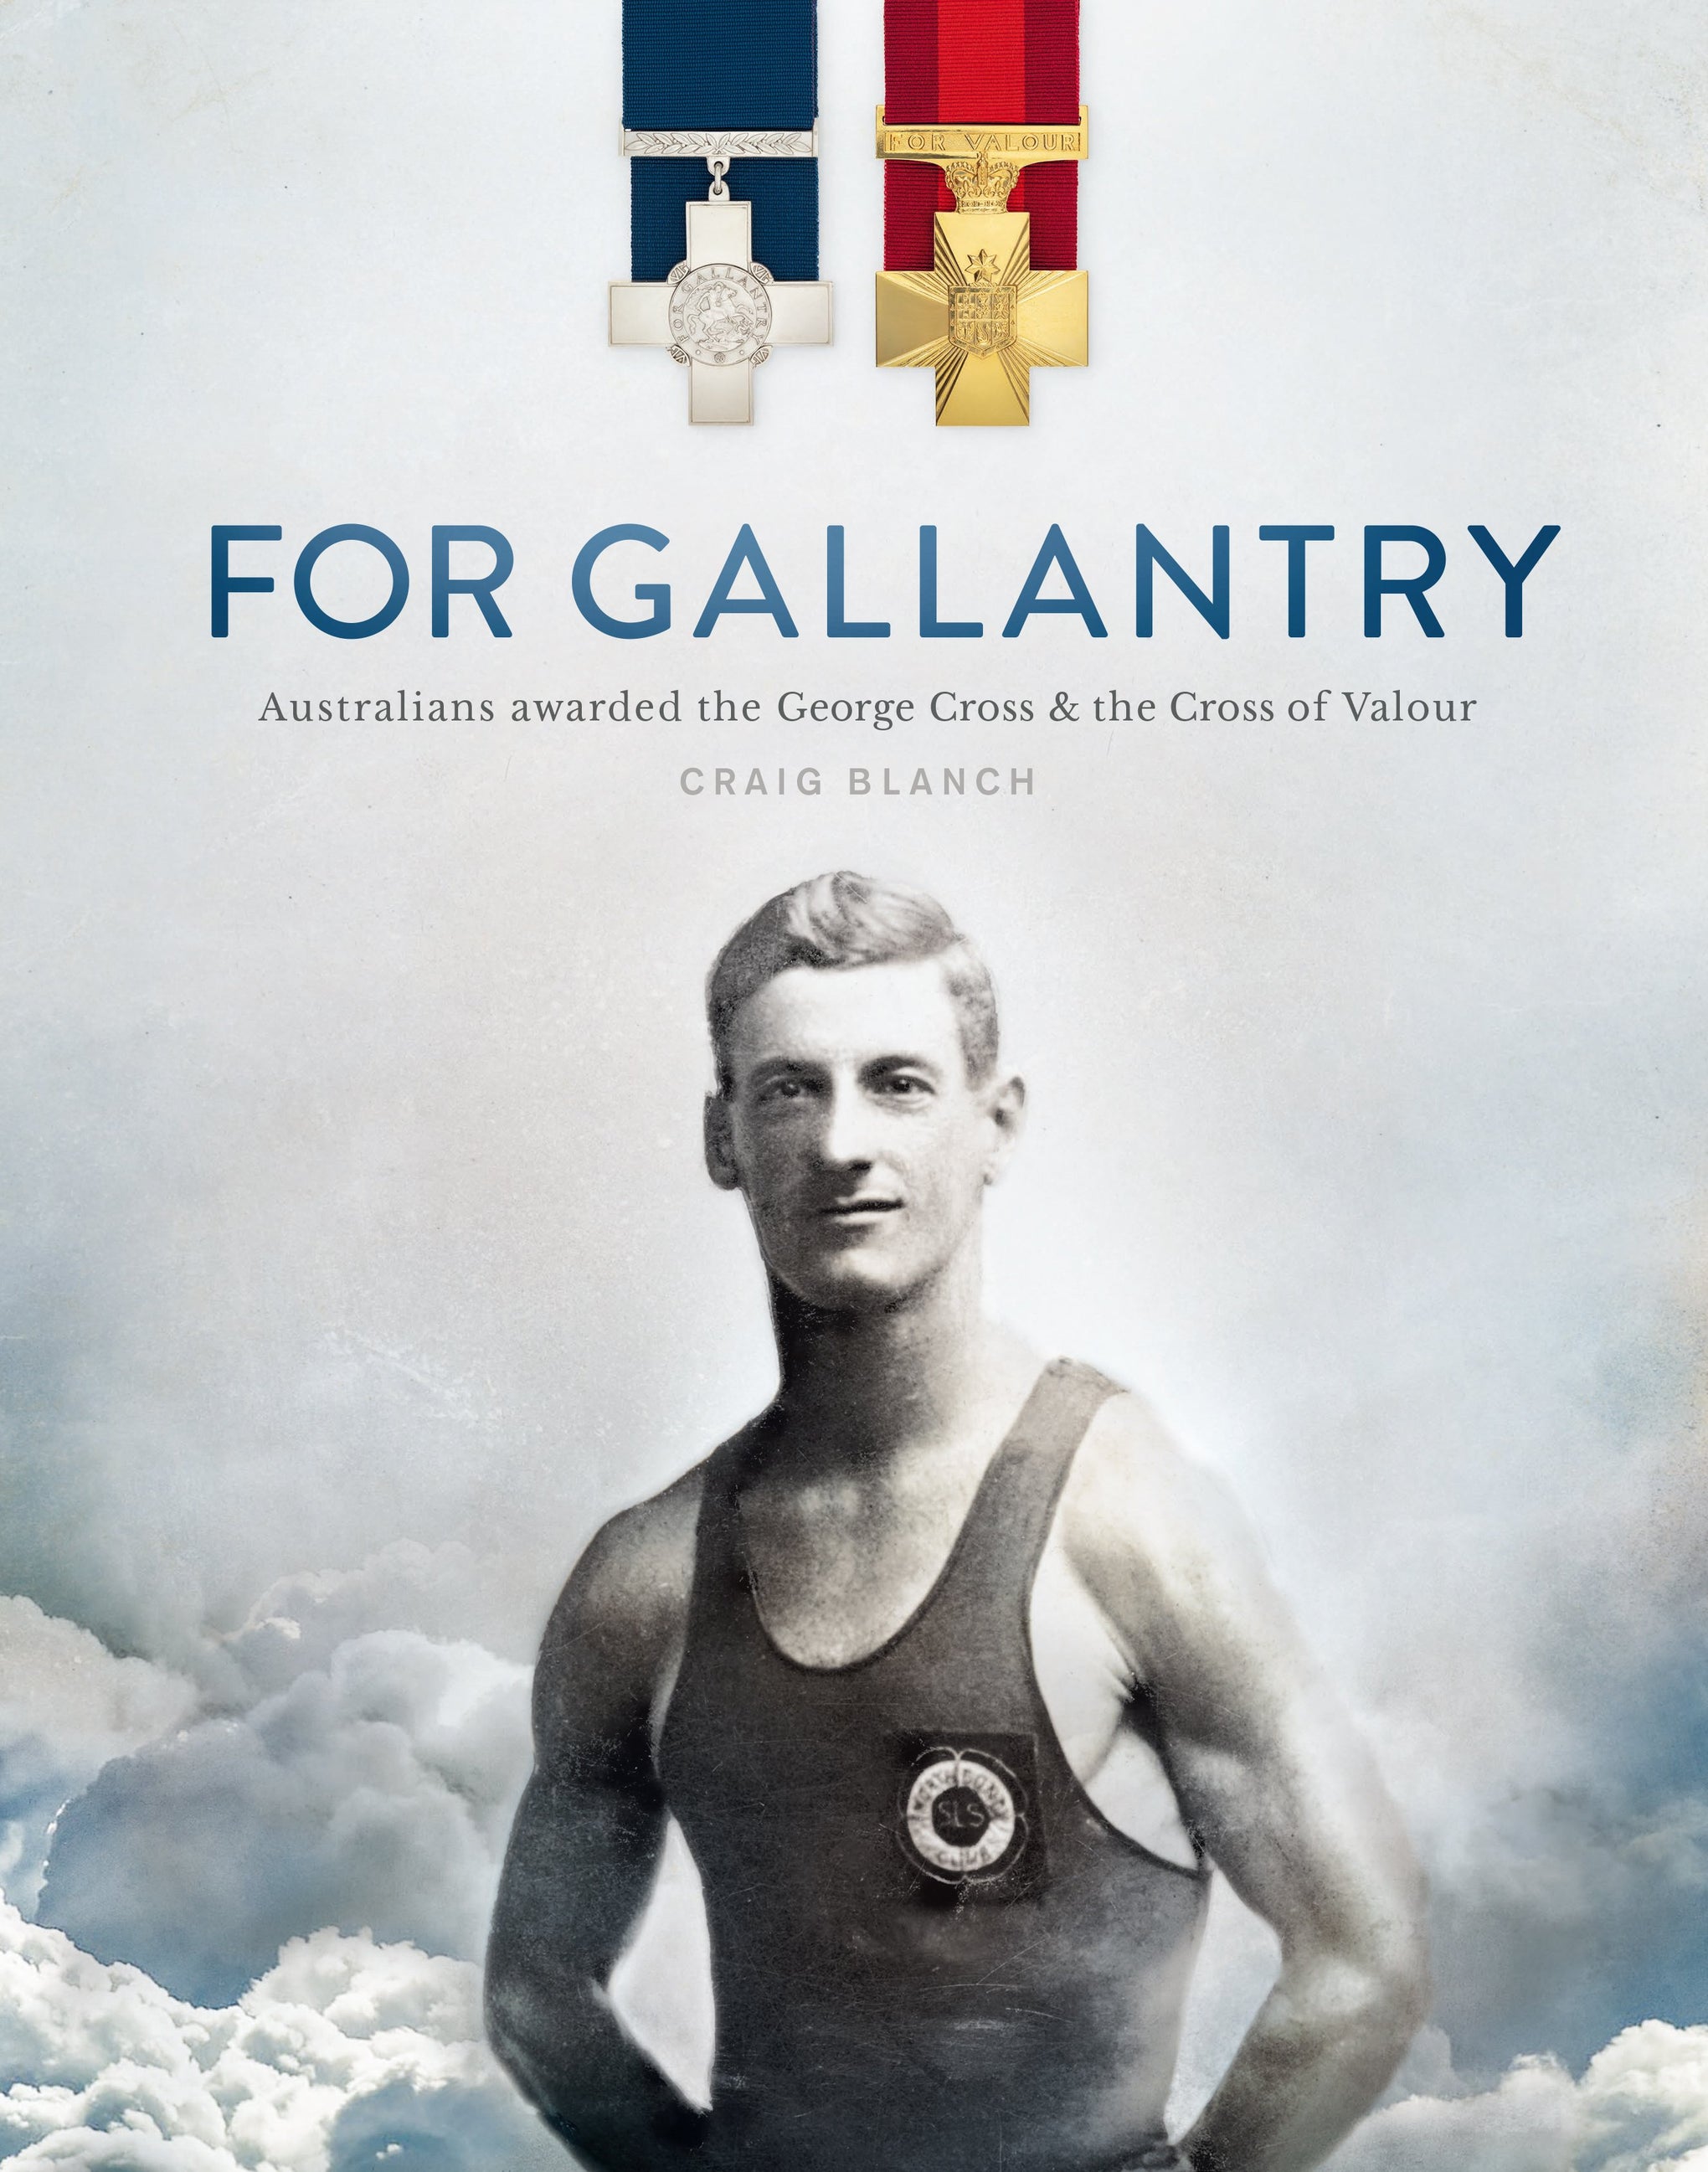 For Gallantry: Australians Awarded the George Cross and the Cross of Valour